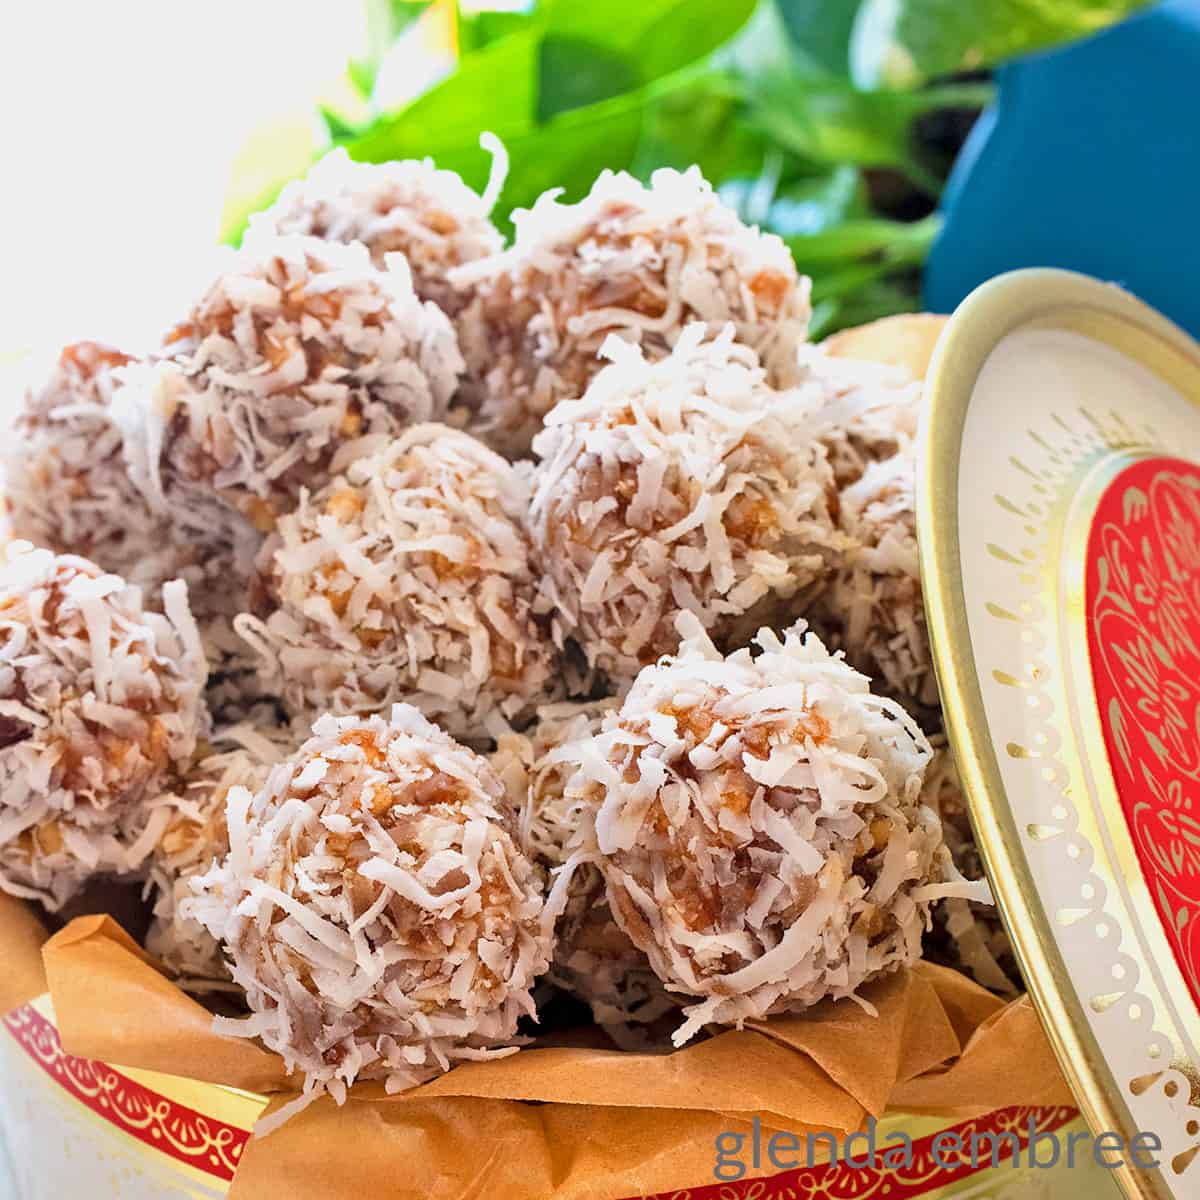 Date Balls in a vintage cookie tin on a concrete countertop